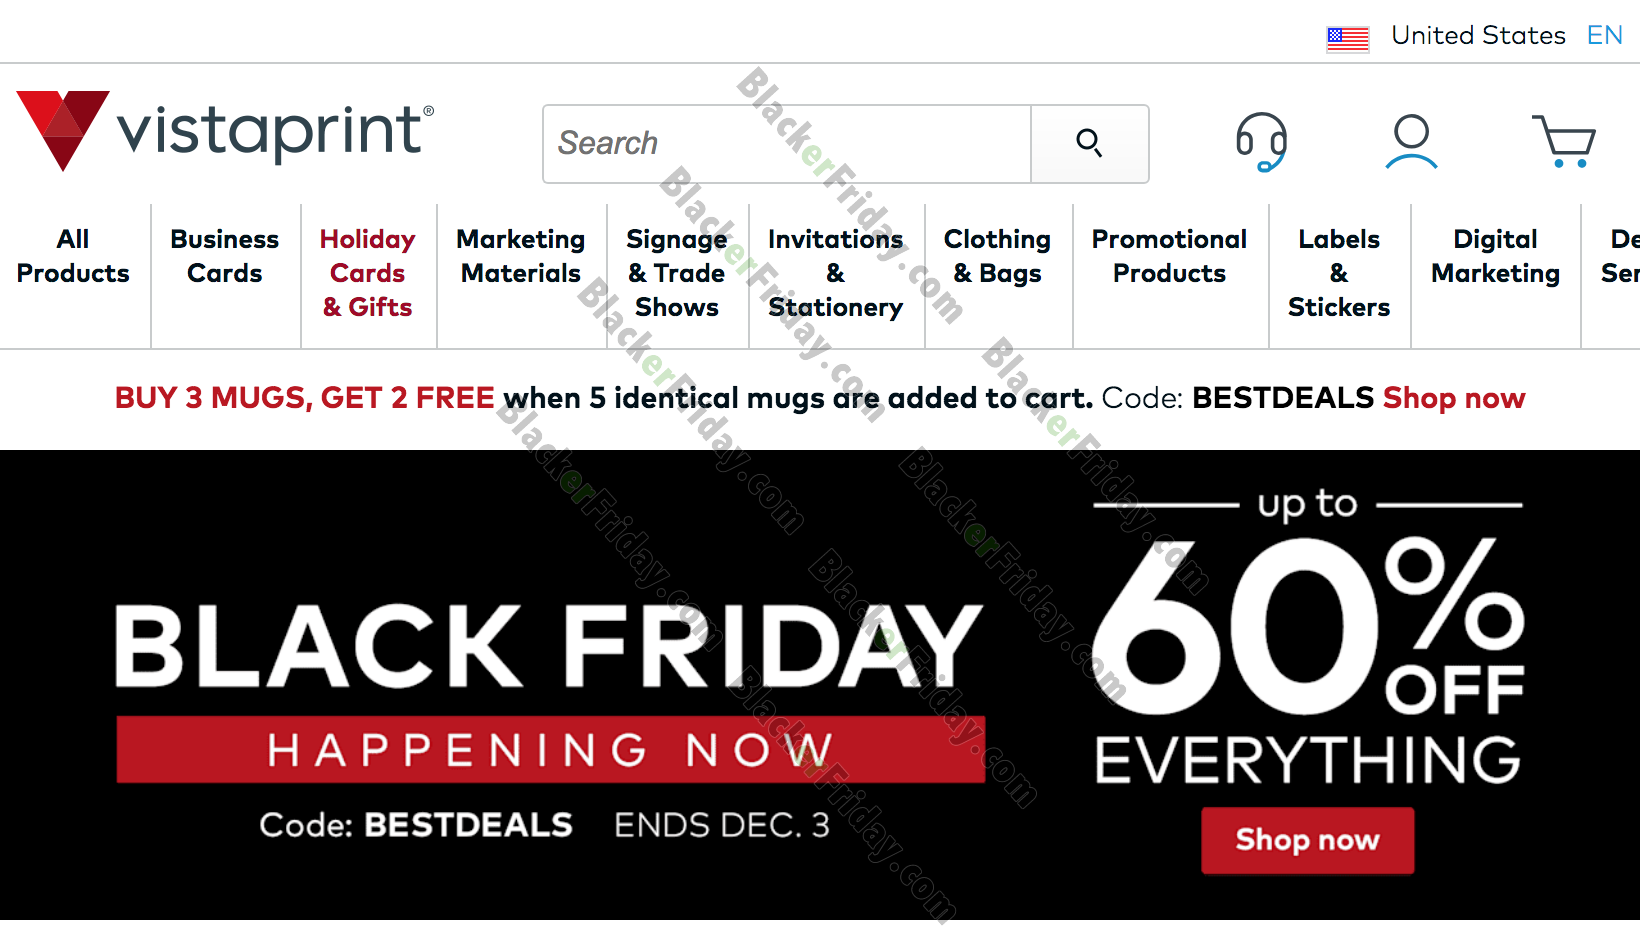 Vistaprint Black Friday 2020 Sale - What to Expect - Blacker Friday